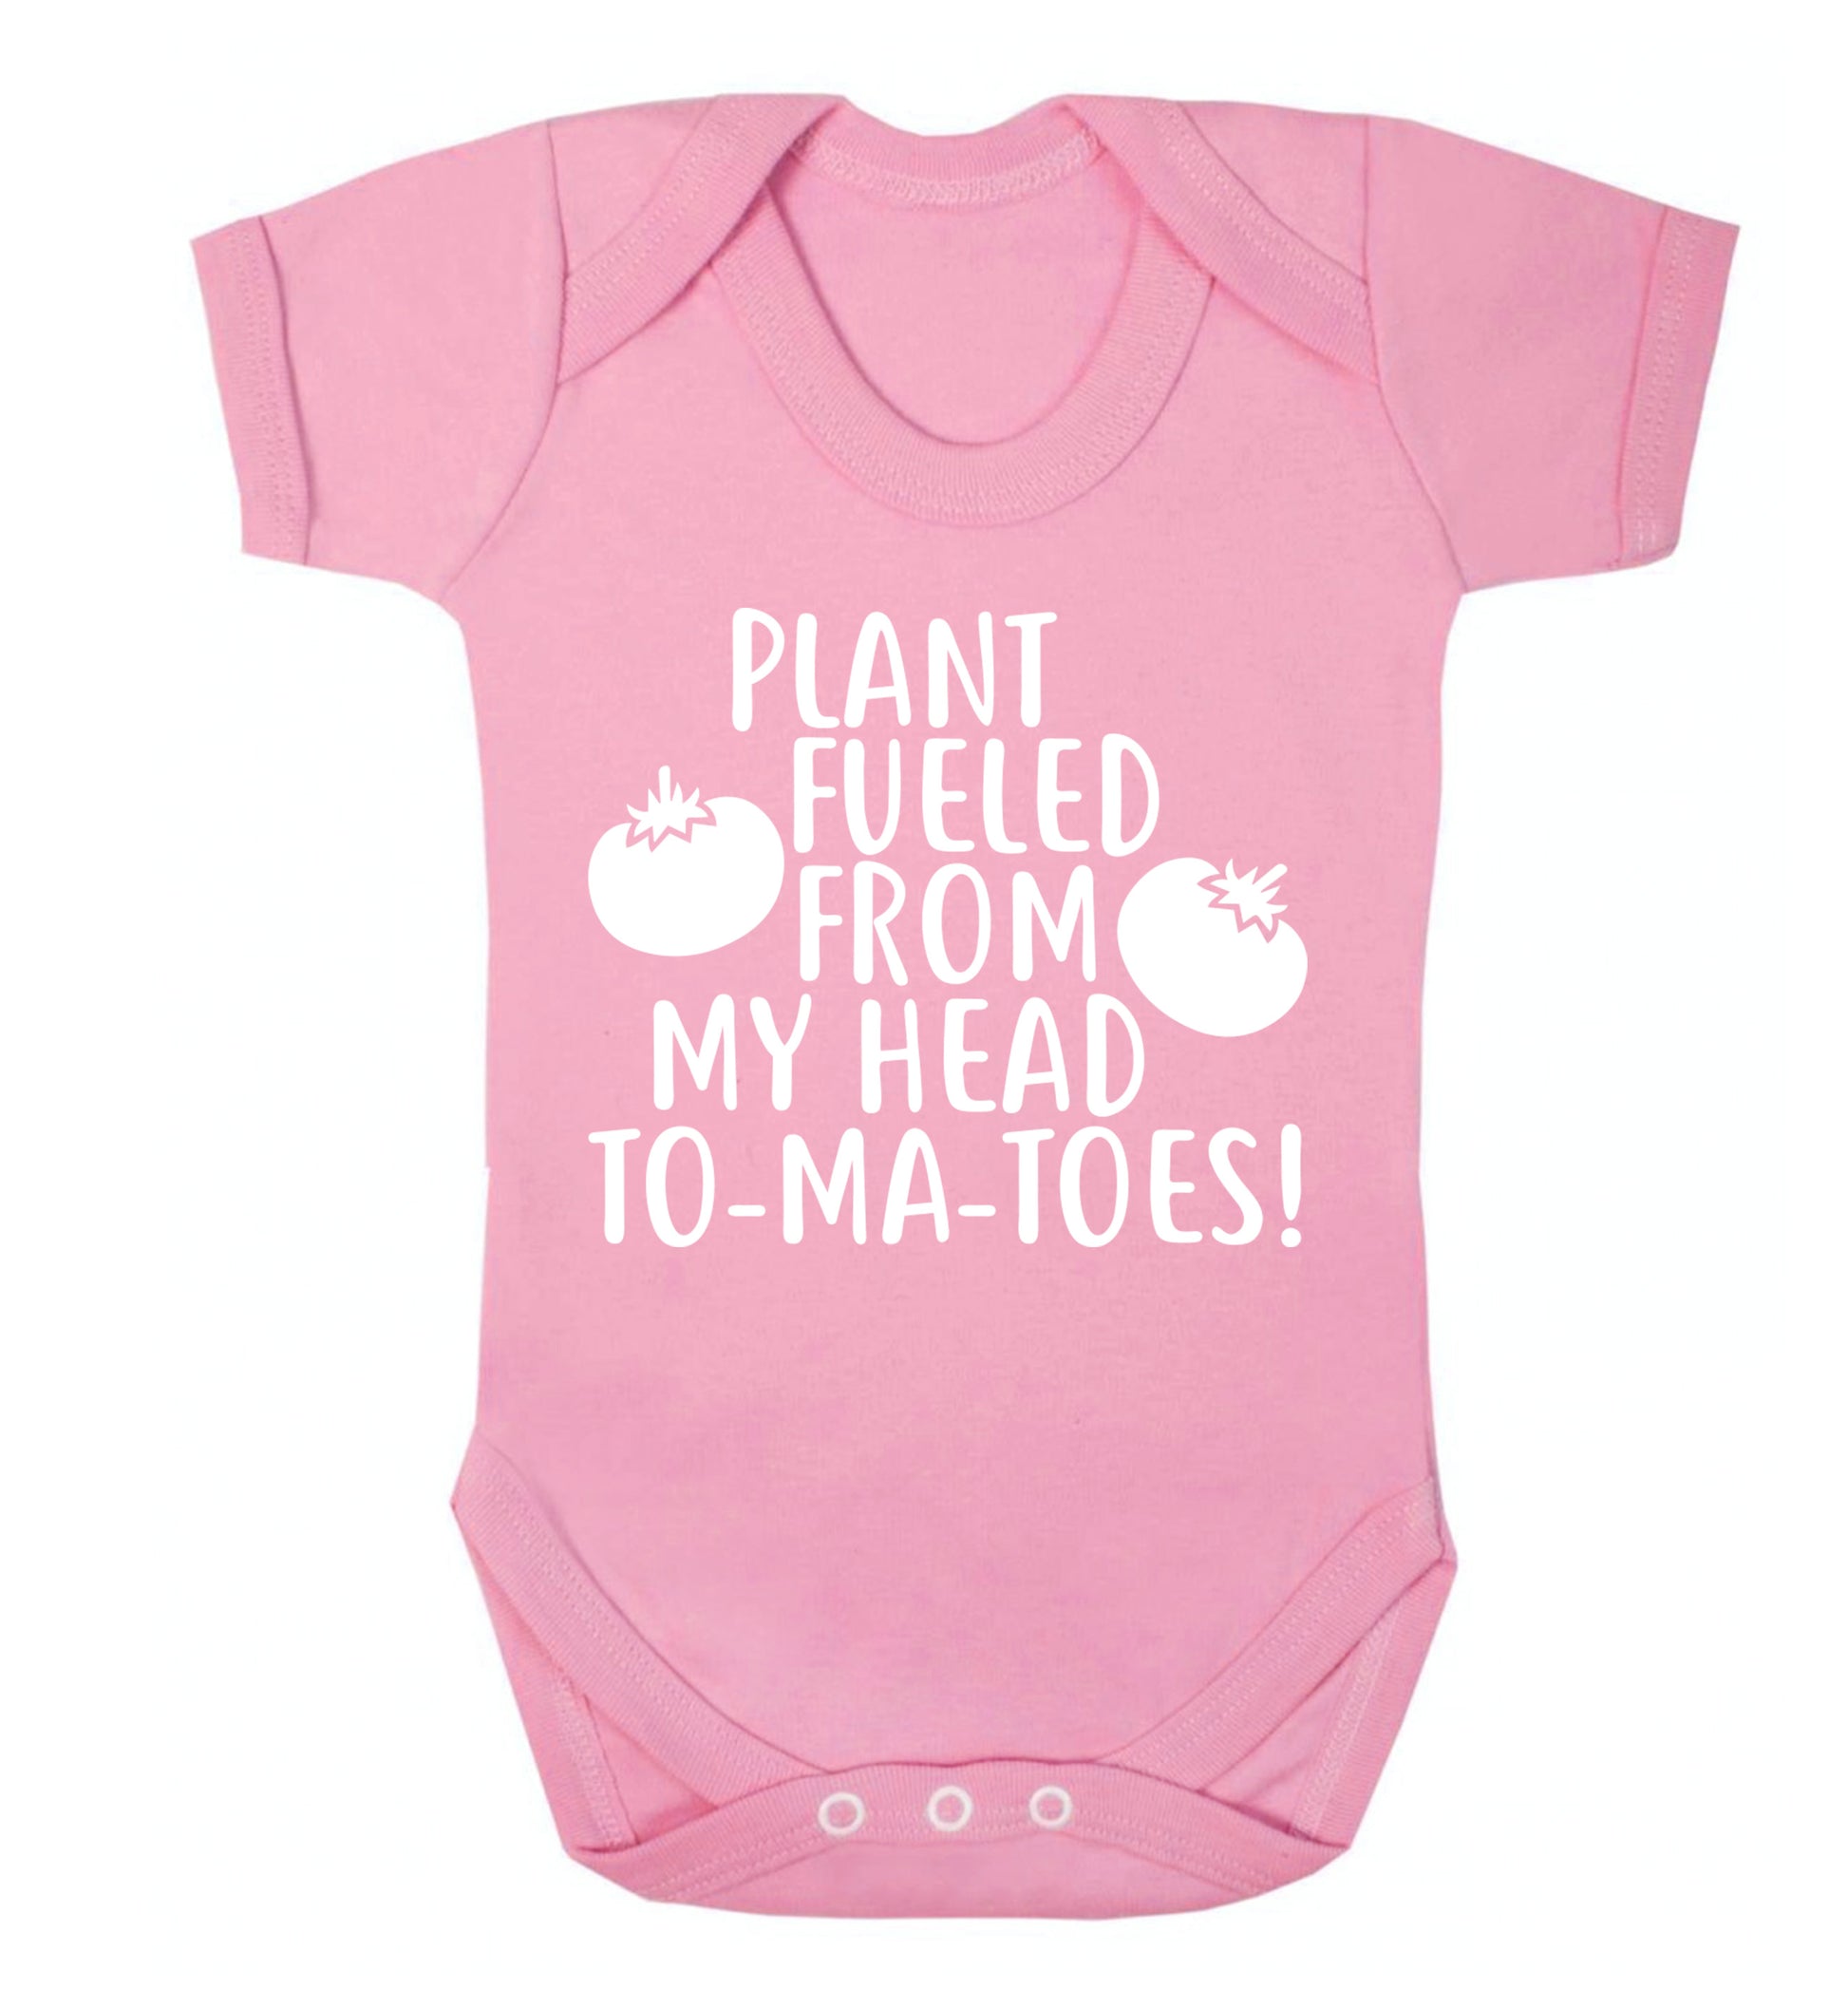 Plant fueled from my head to-ma-toes Baby Vest pale pink 18-24 months